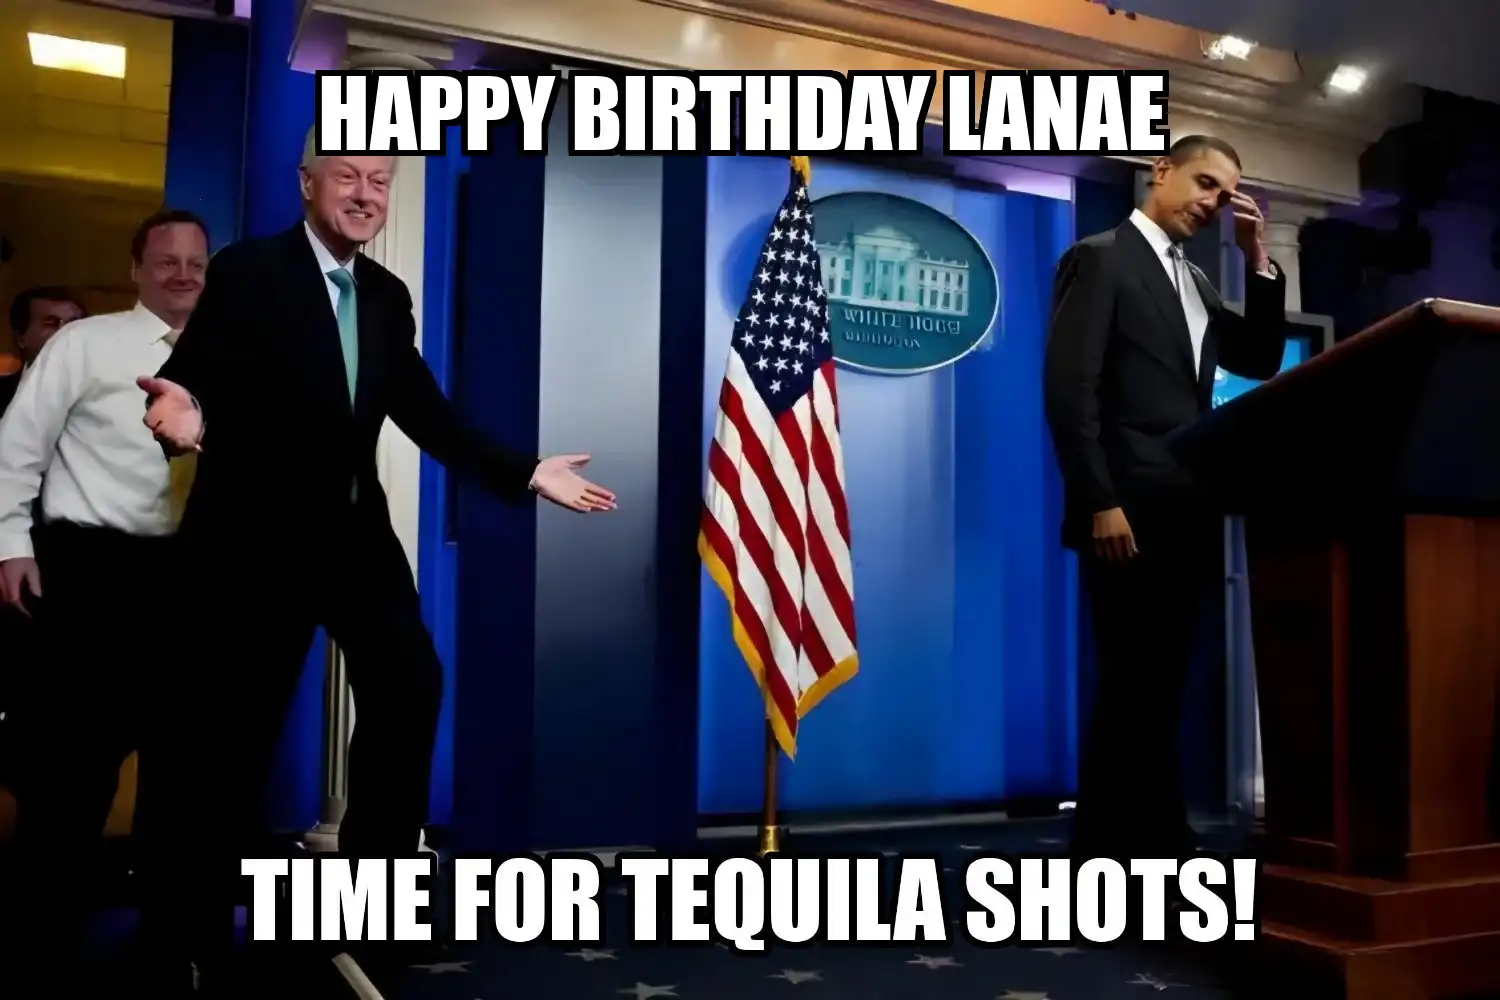 Happy Birthday Lanae Time For Tequila Shots Memes